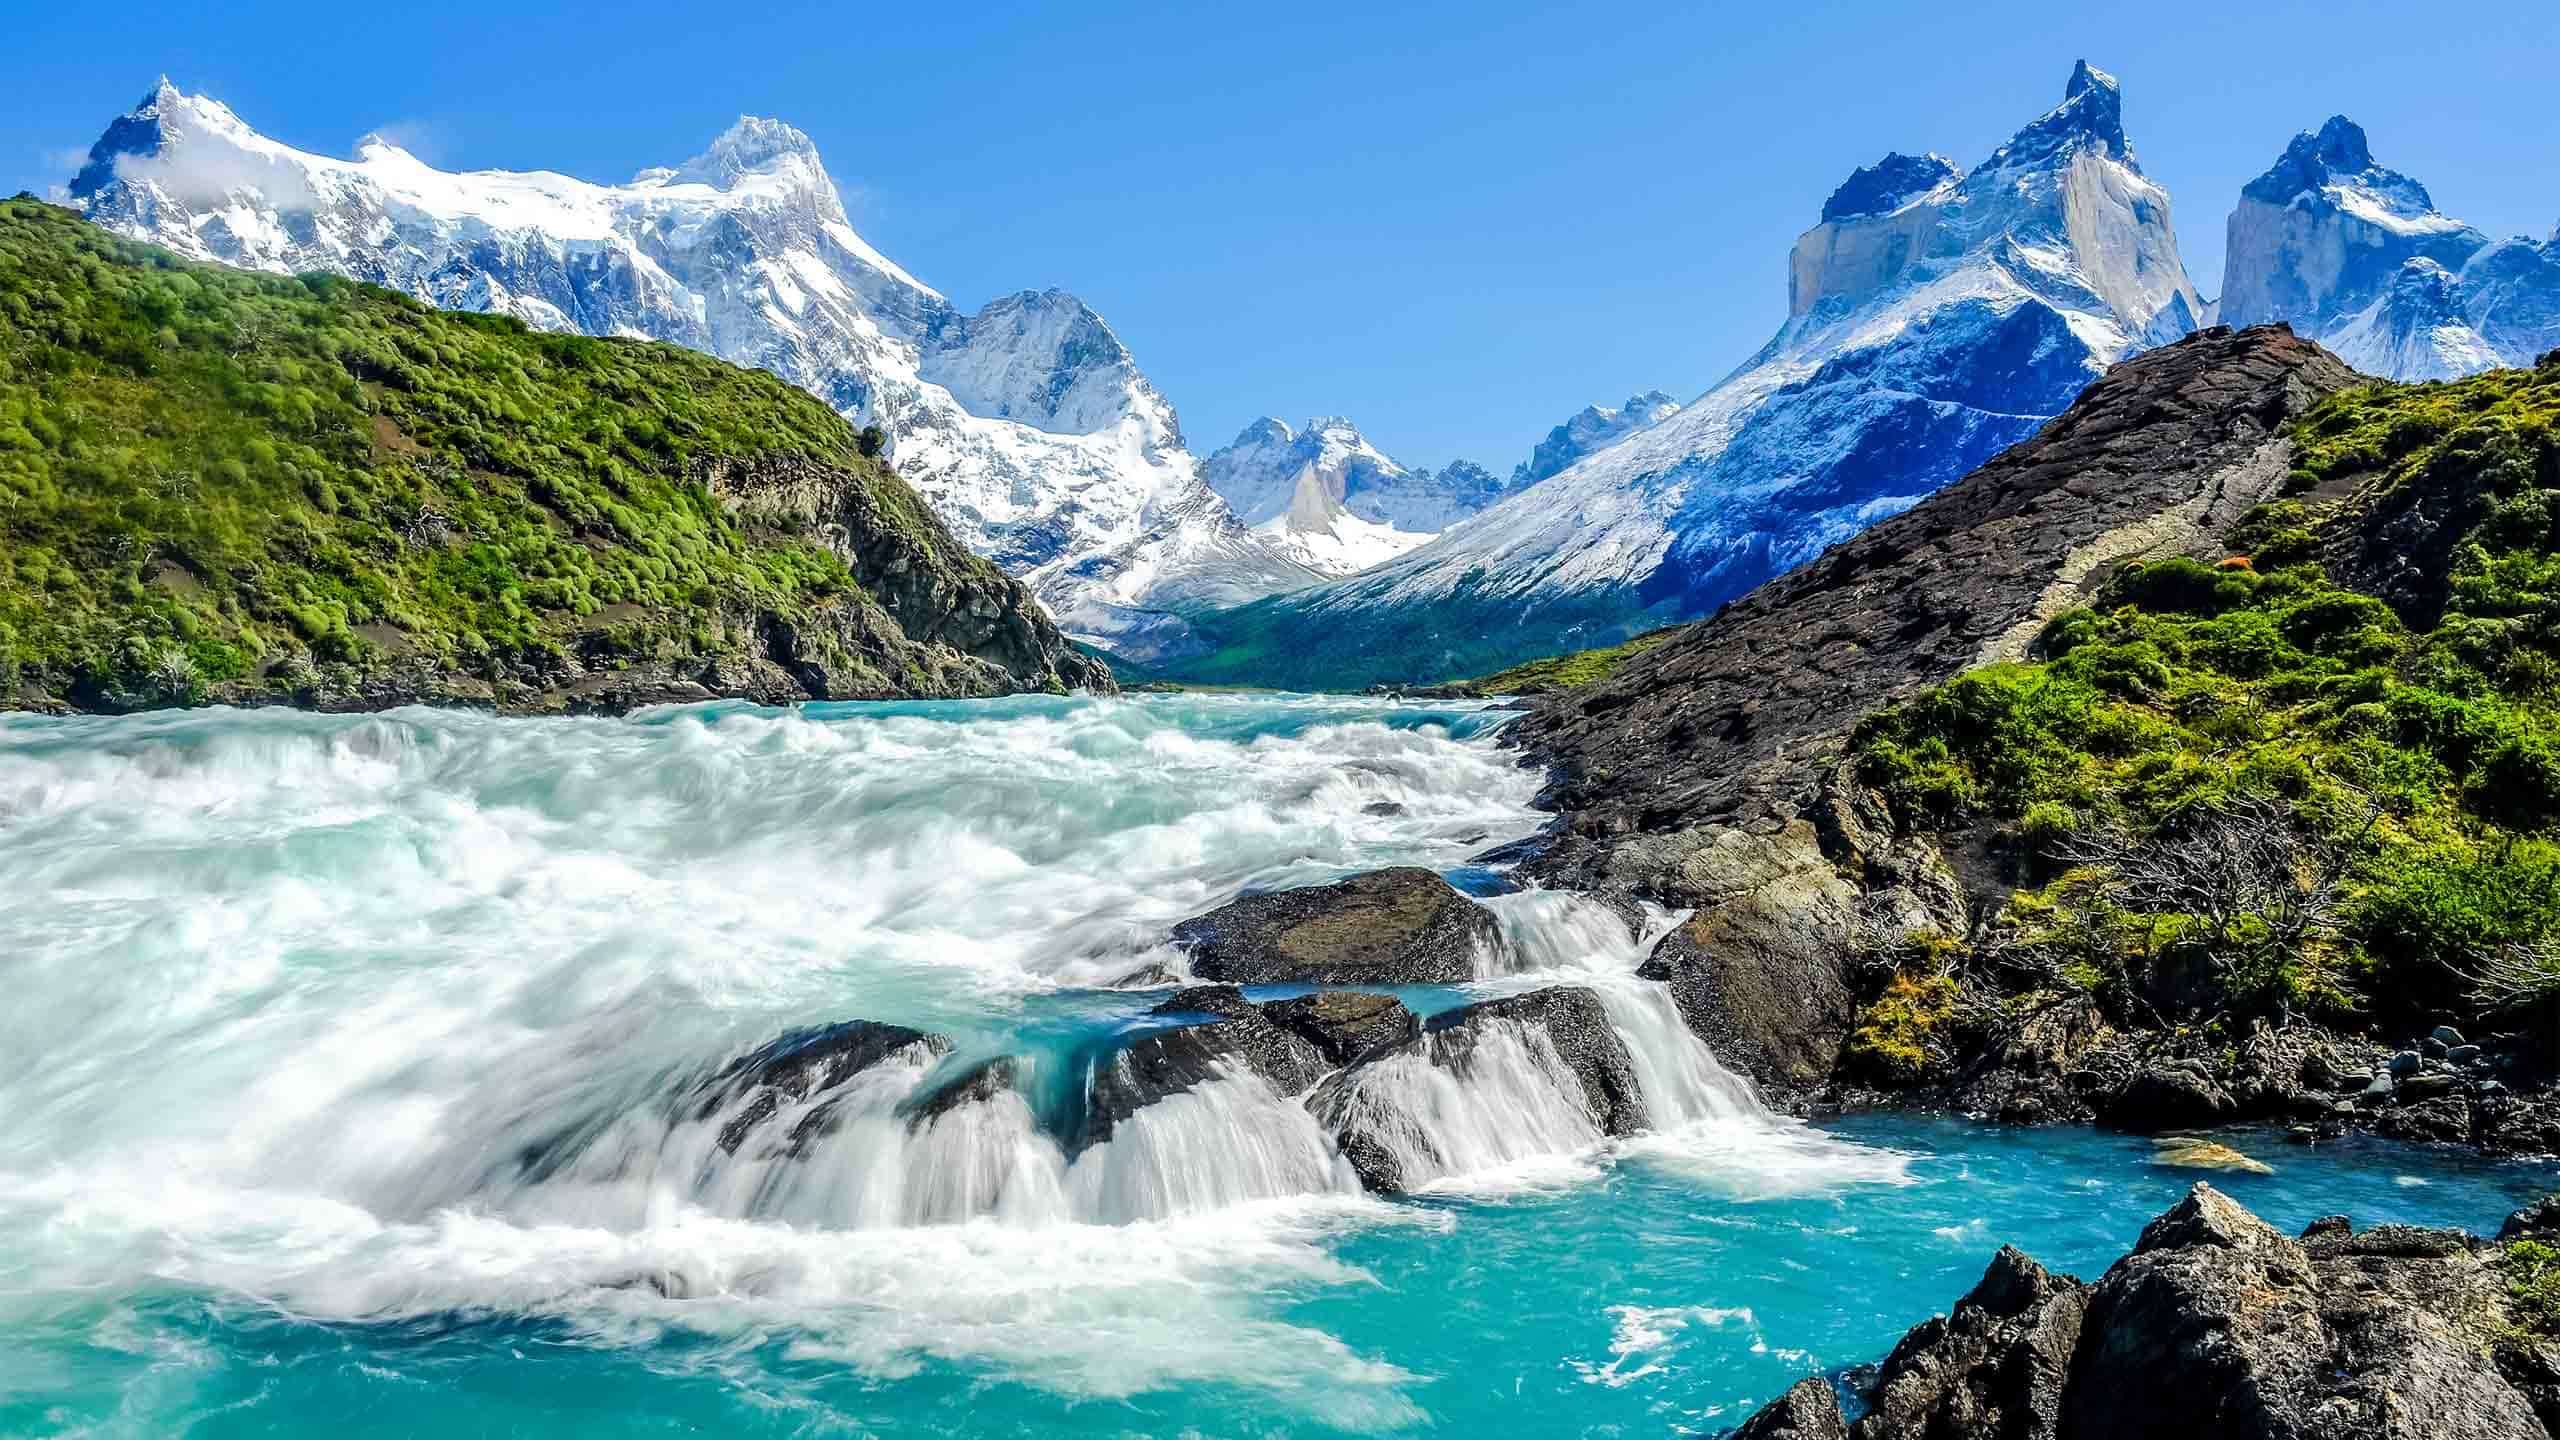 Chile Patagonia & Fjords Cruise & Walk 9D8N (Fjords, Cape Horn & Torres Del Paine), Fully Guided 